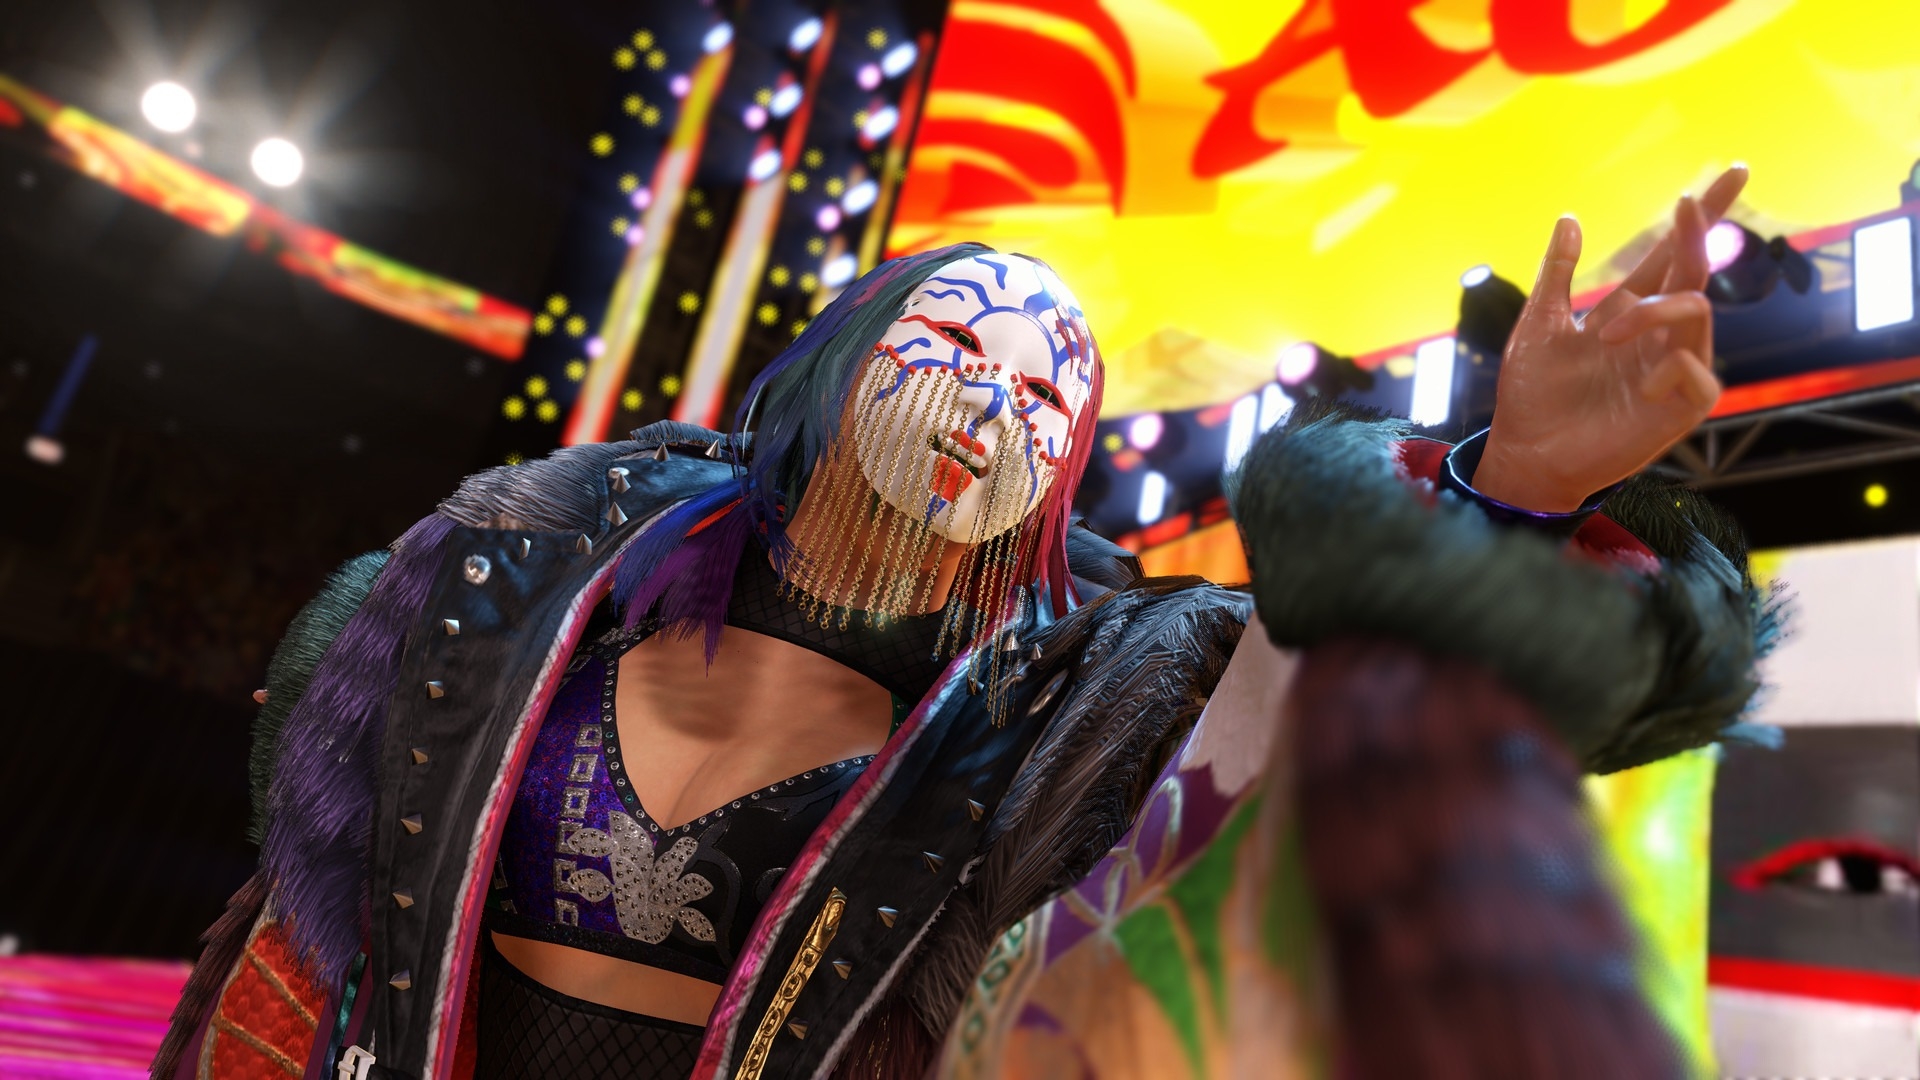 Today we are going to cover the latest WWE 2K22 update 1.12 patch notes, so you know what has changed in the popular wrestling game.